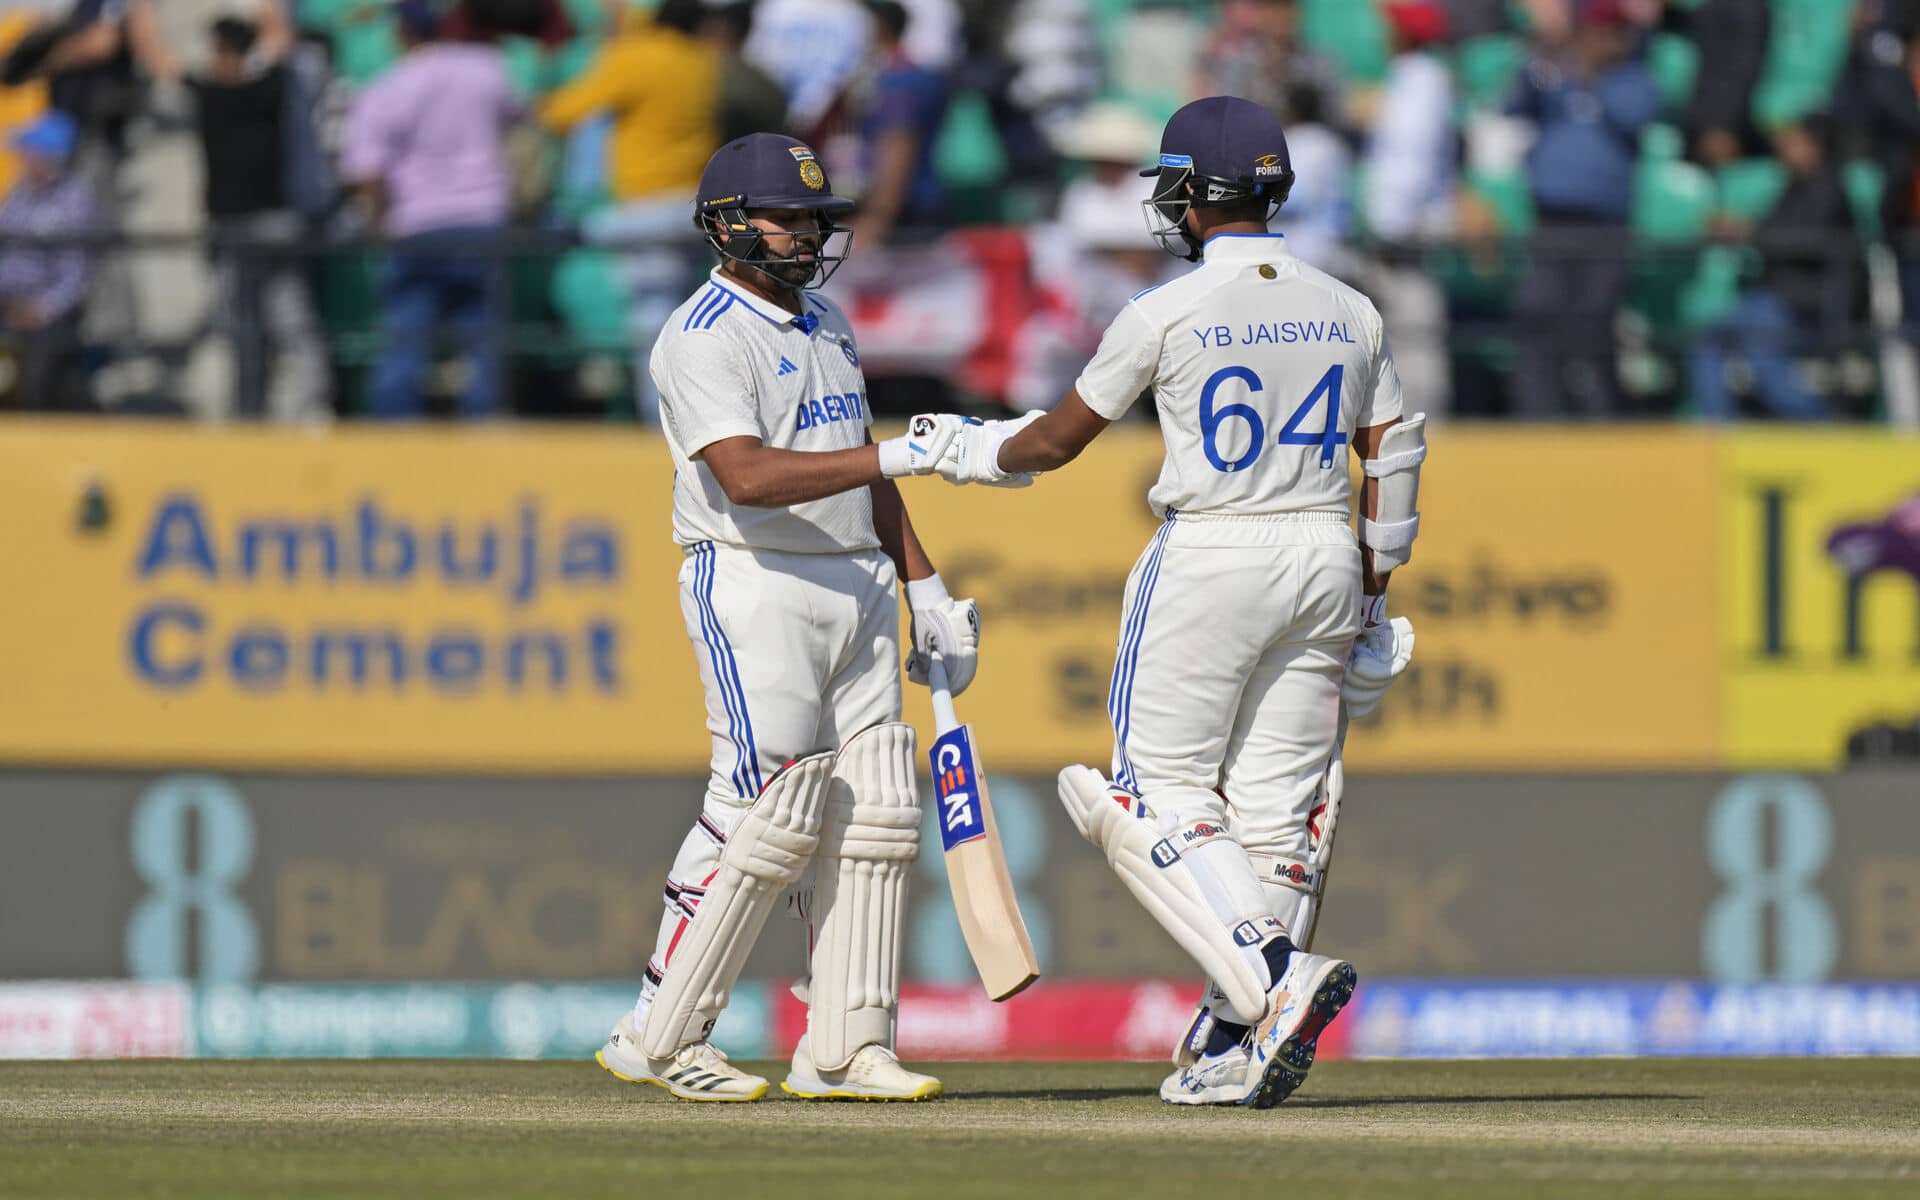 IND vs ENG, 5th Test, Day 1 Live Score: Match Updates, Highlights & Live Streaming